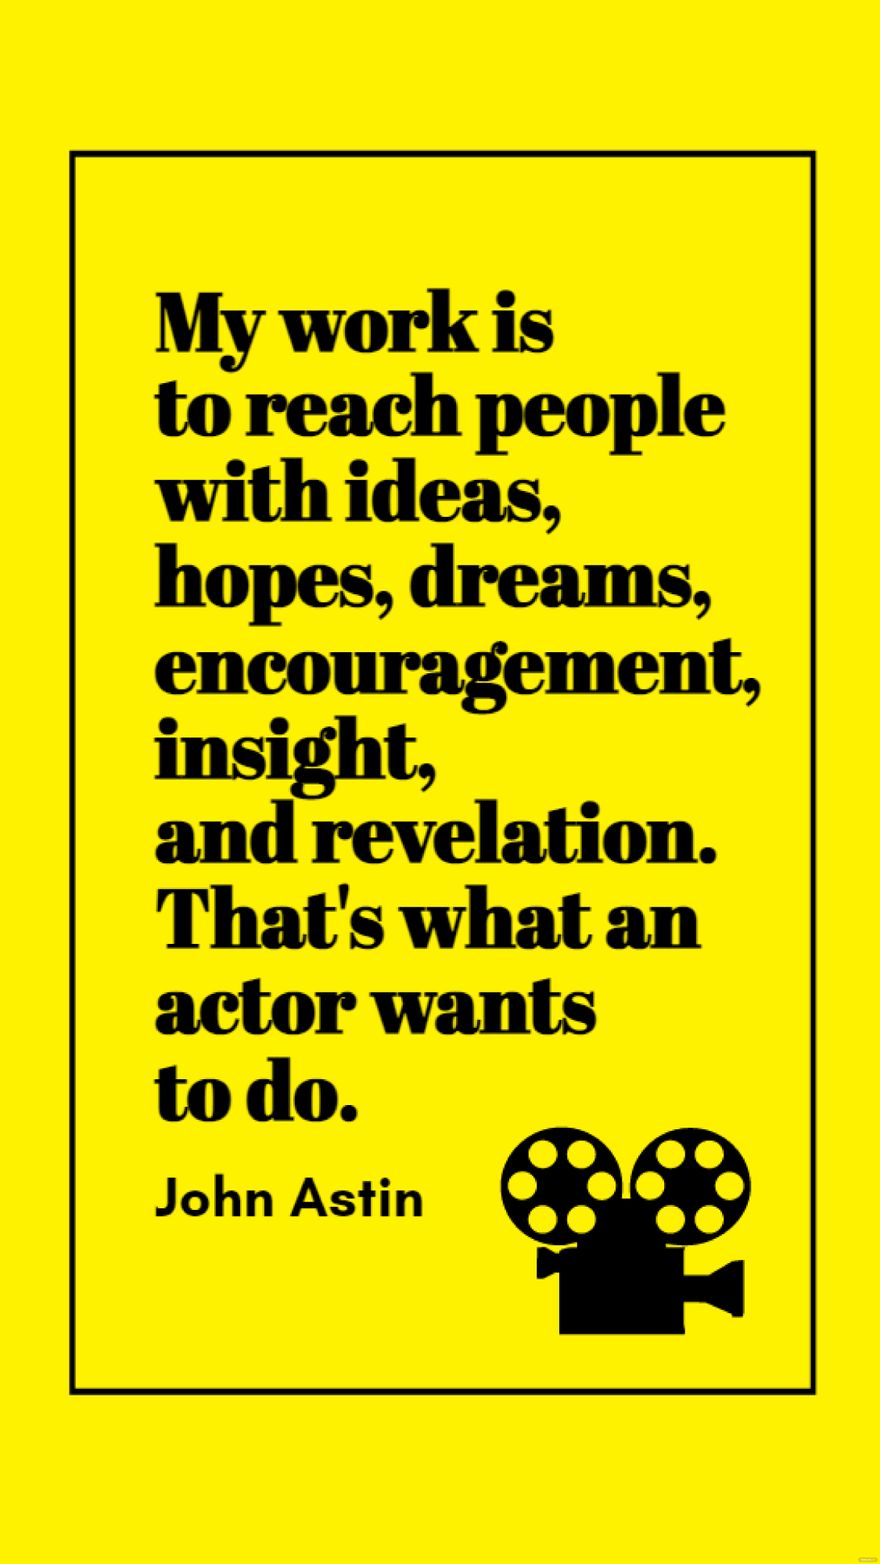 John Astin - My work is to reach people with ideas, hopes, dreams, encouragement, insight, and revelation. That's what an actor wants to do.